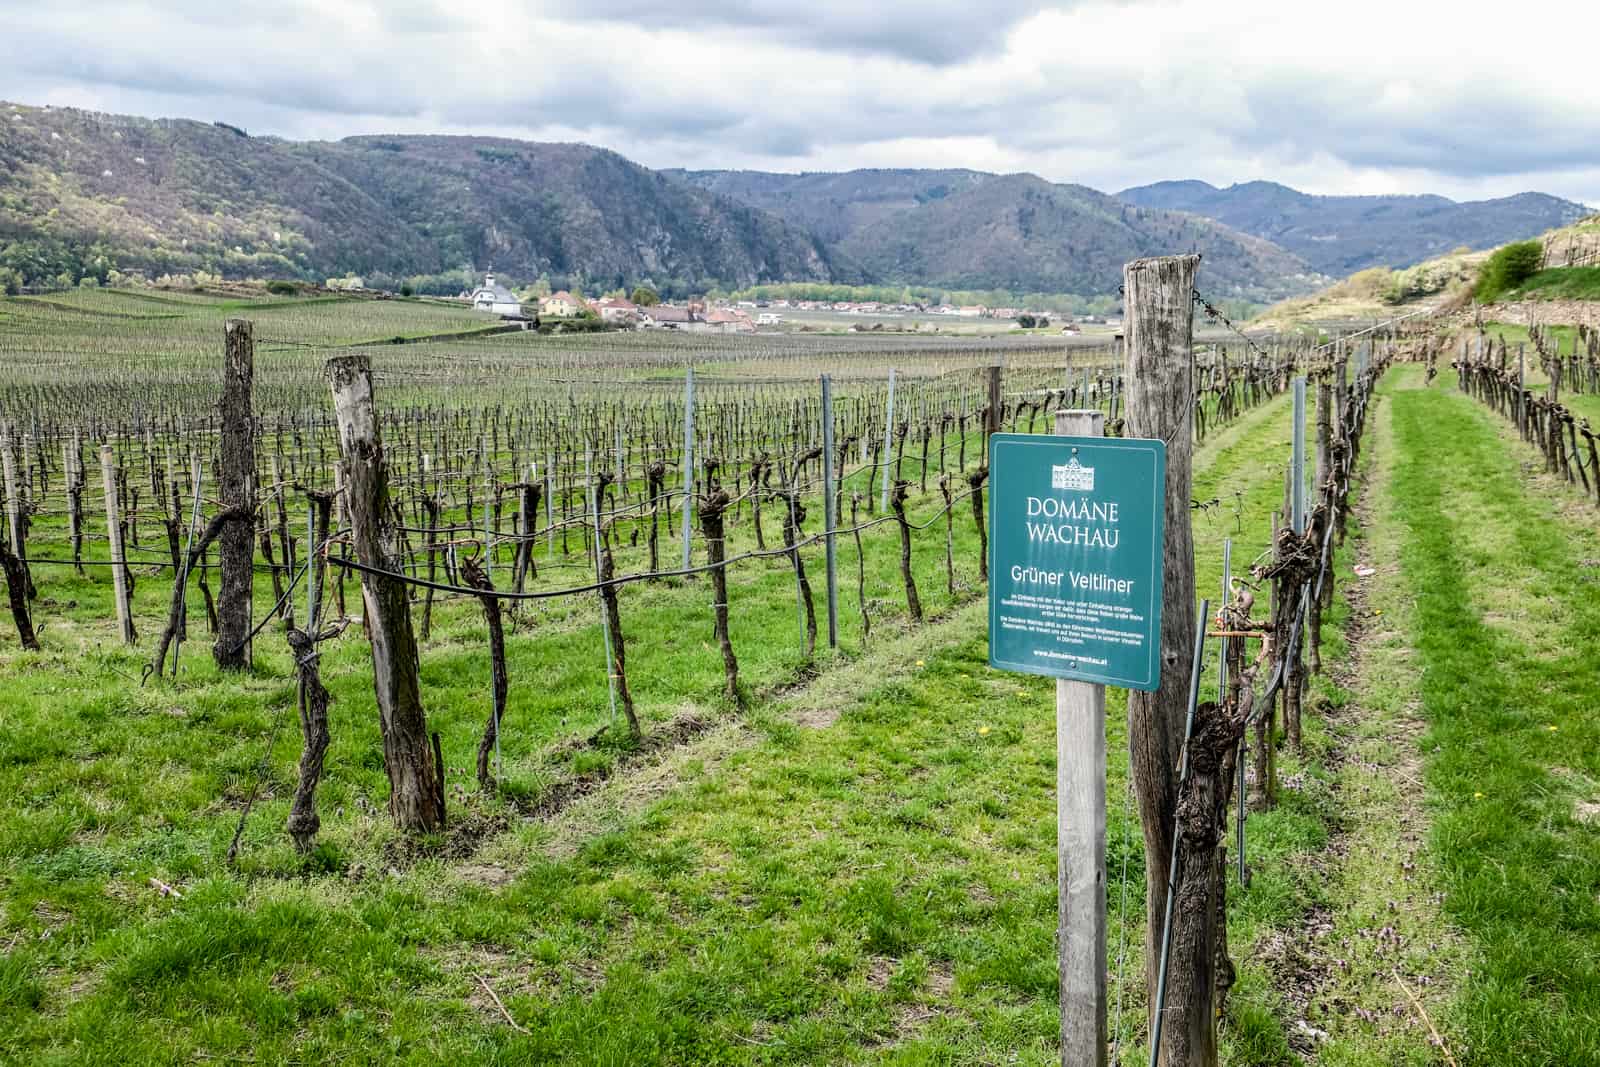 A sign highlighting the Domäne Wachau winery Grüner Veltiner grapes are growing on these rows of wooden vines where sticks are standing in the bright green grass